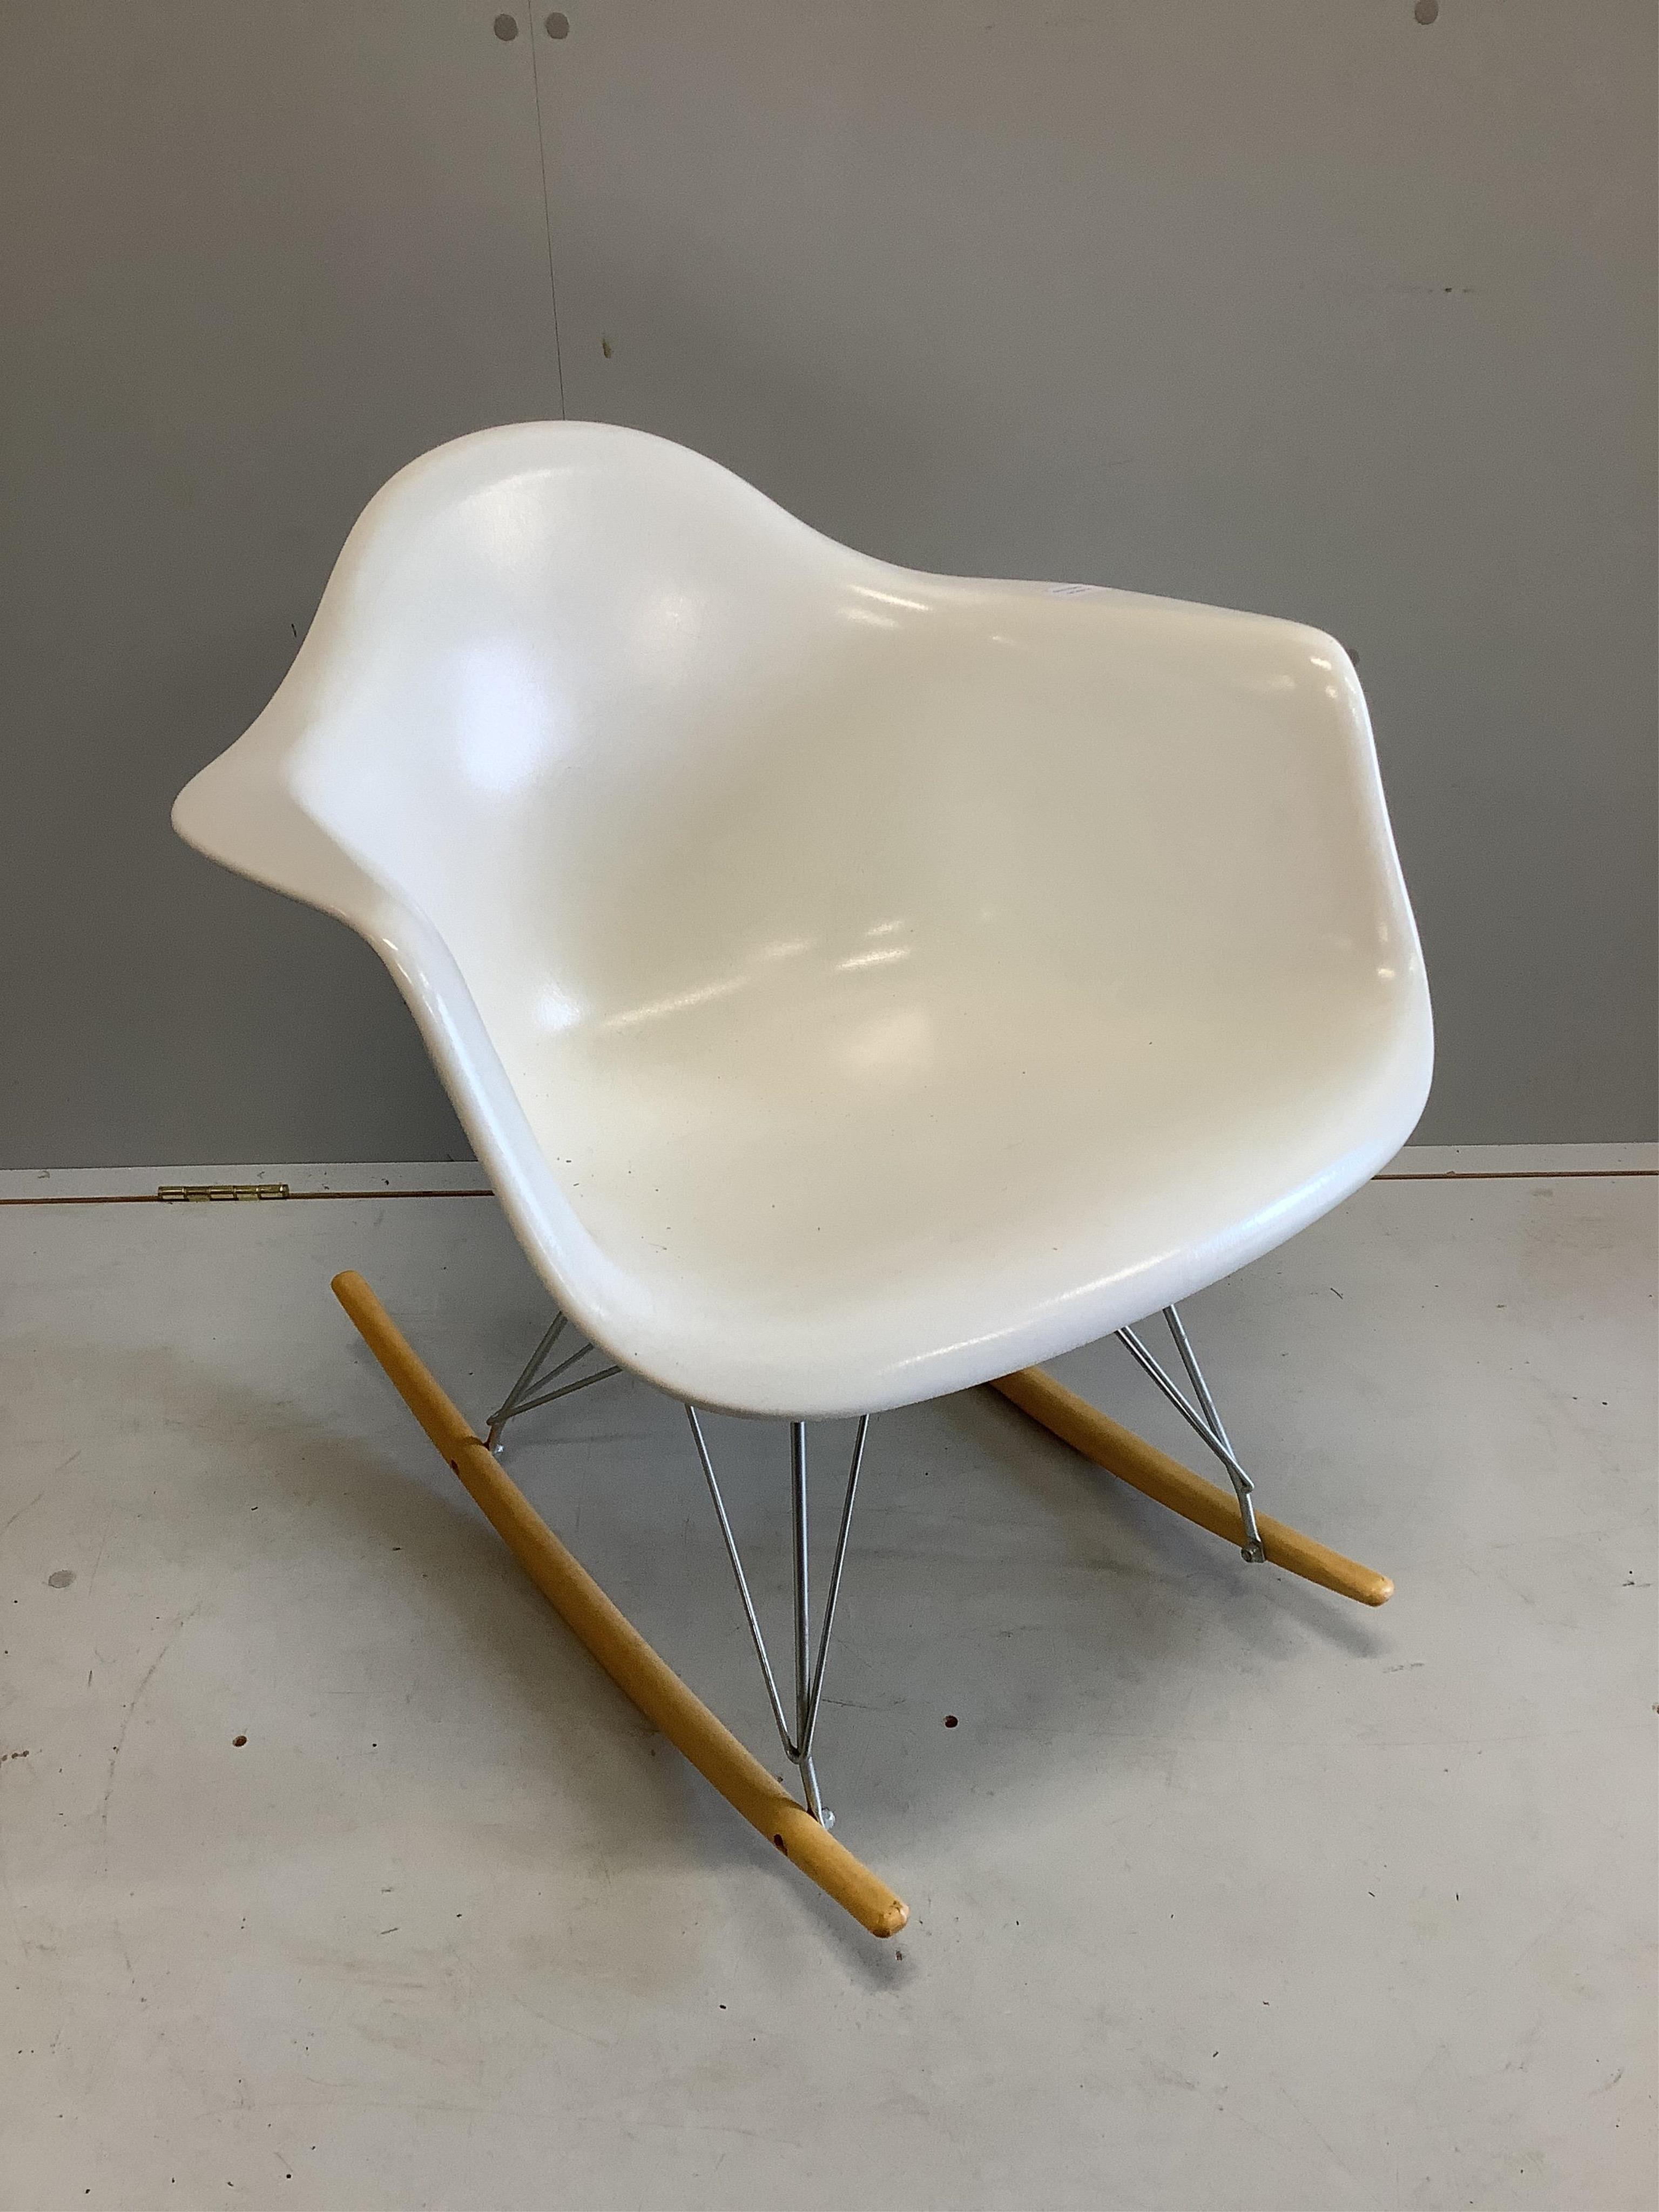 A Vitra Eames rocking chair, purchased from Skandium, width 63cm, depth 68cm, height 67cm